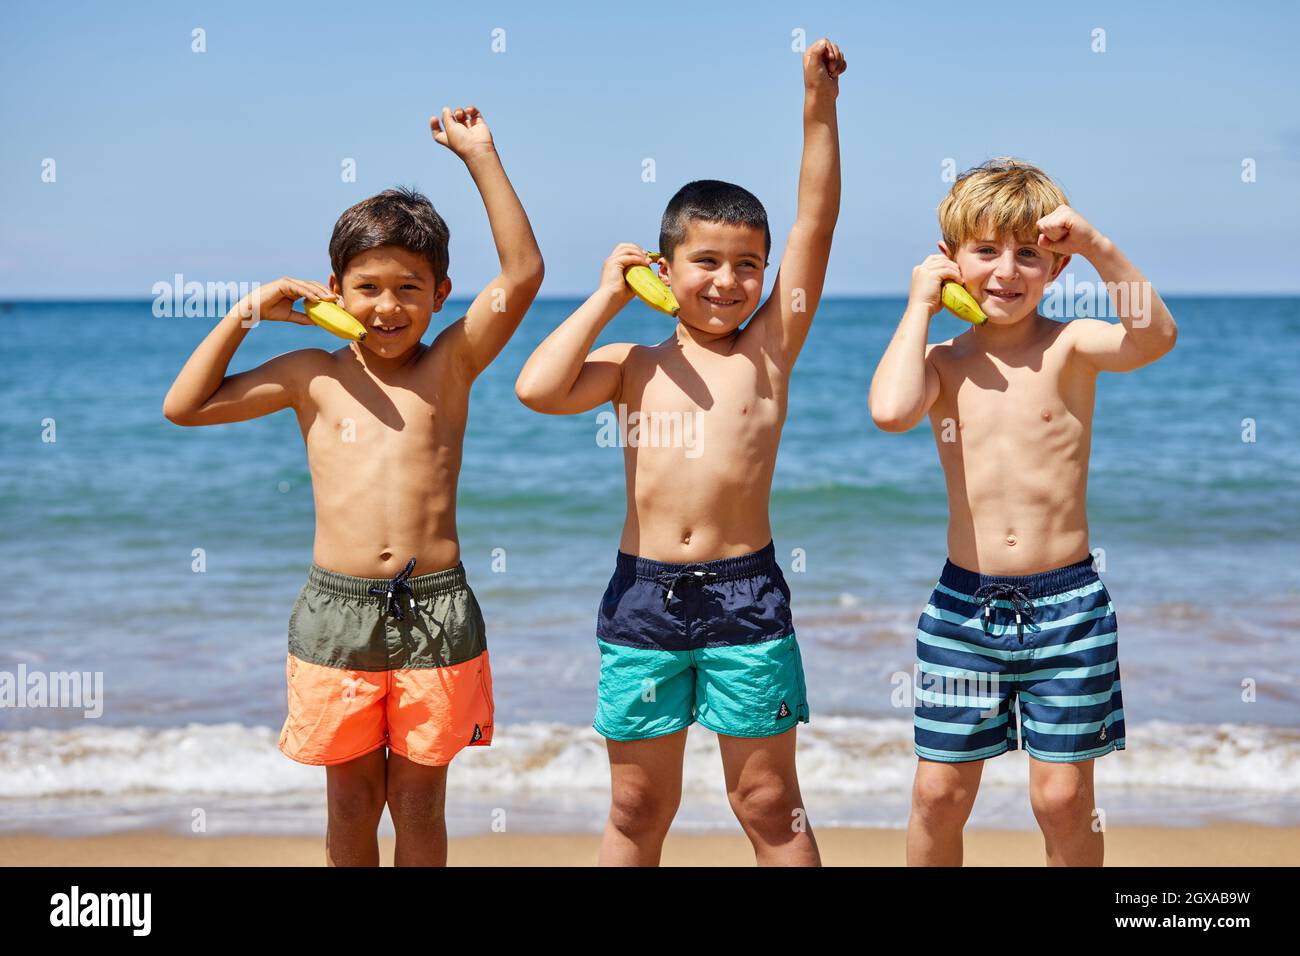 Children 5-10 years old, Playing on the beach, Zumaia, Gipuzkoa, Basque Country, Spain Stock Photo